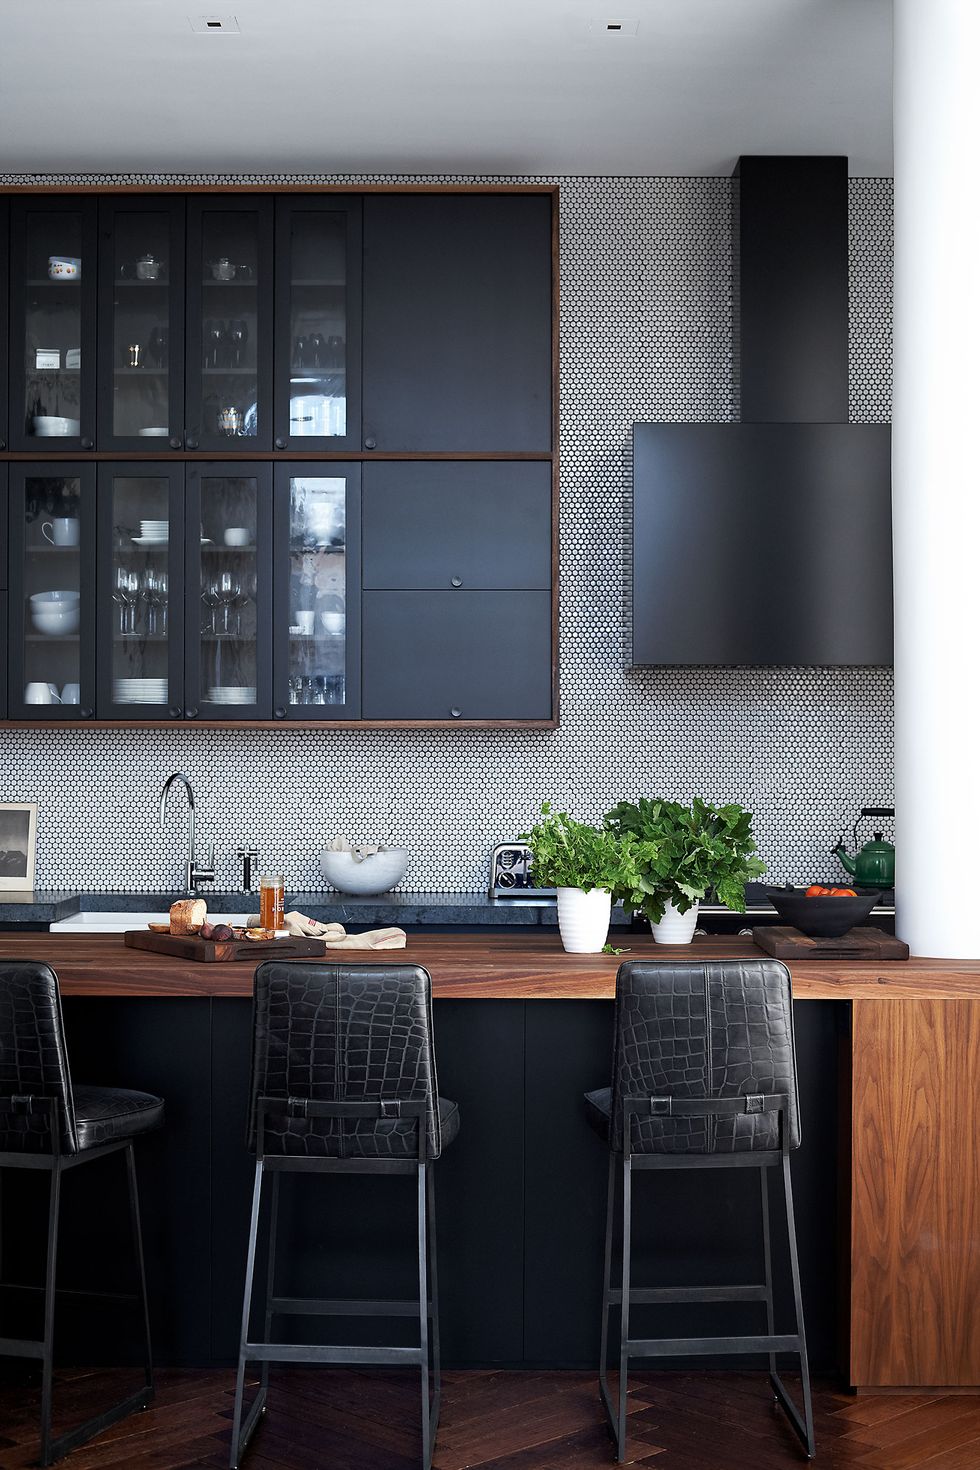 the kitchen cabinets and hood are custom designs the barstools by lawson fenning are covered in a leather by edelman and the penny tiles are by ann sacks